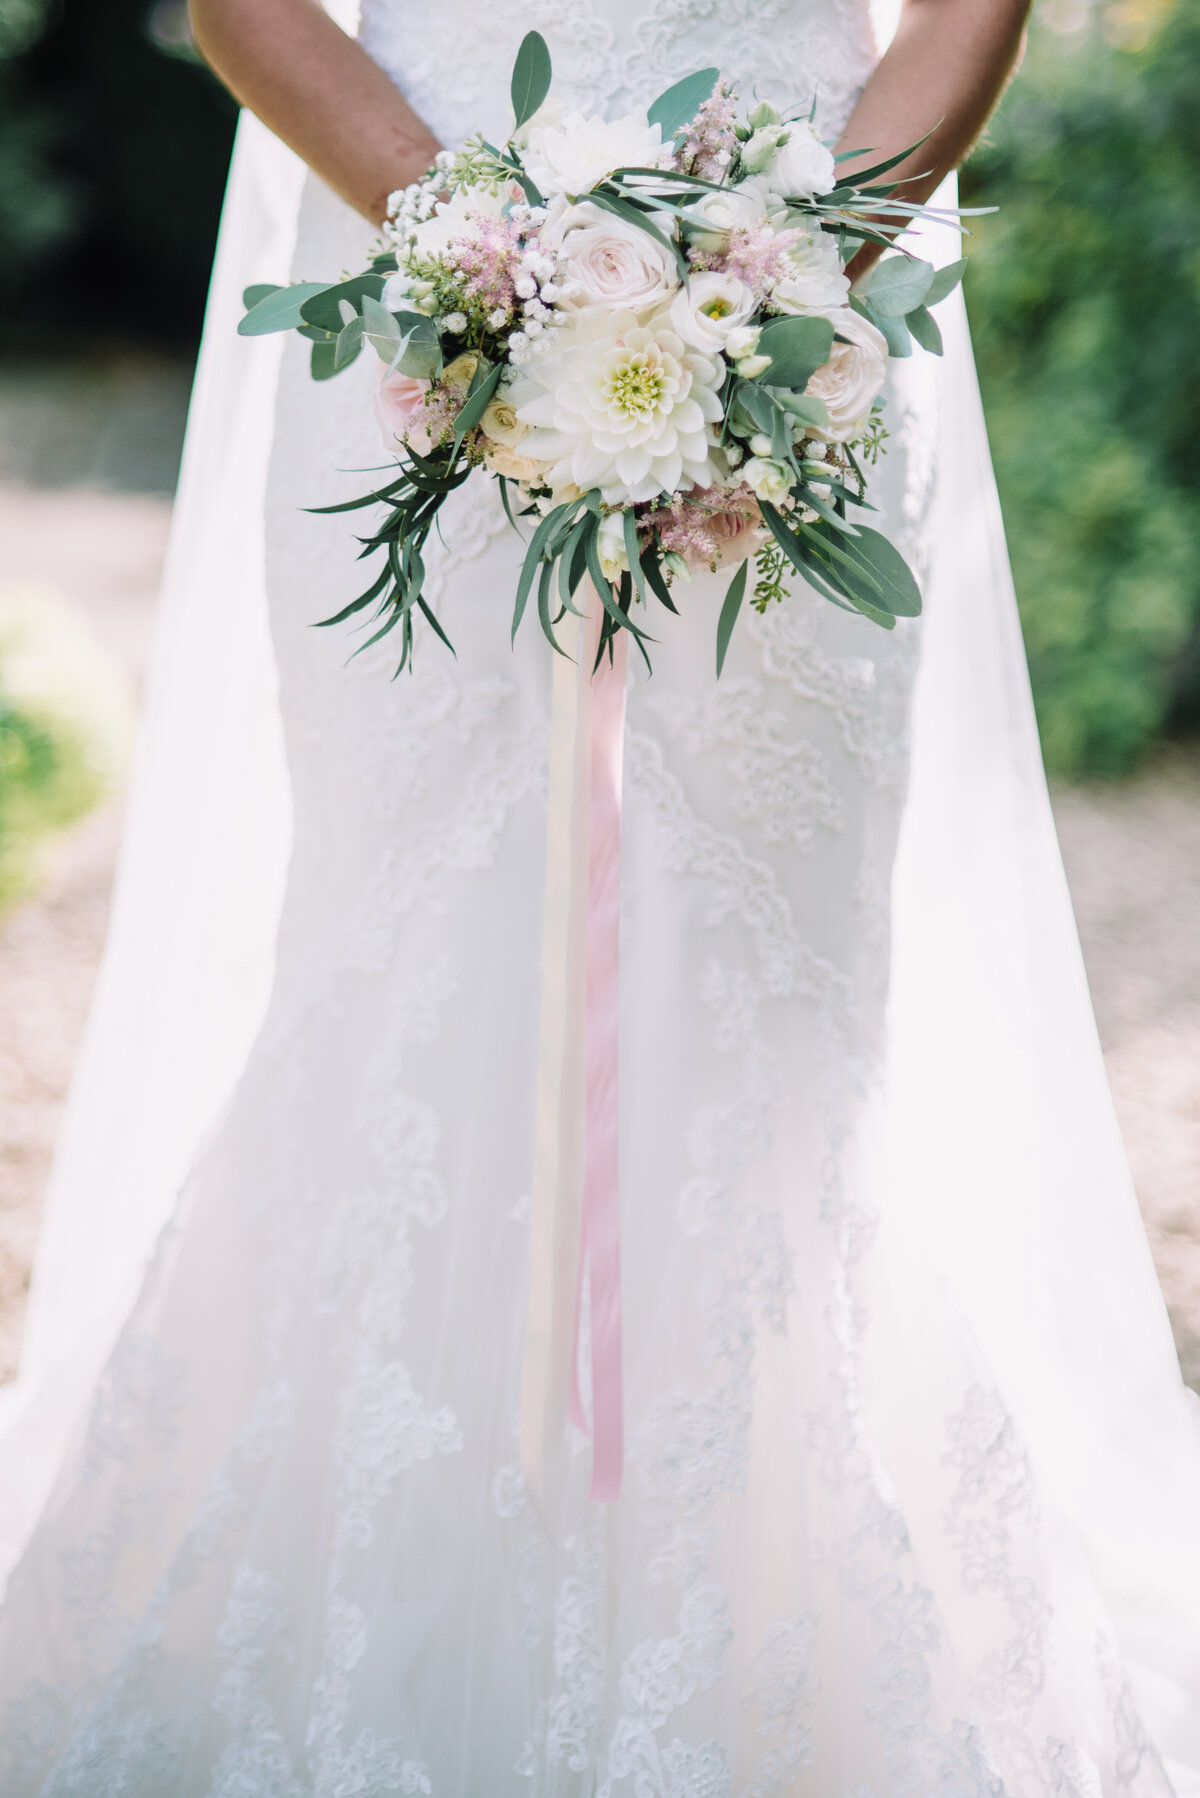 A bride holding her bouquet and waist height taken by London Wedding Photographer Liberty Pearl